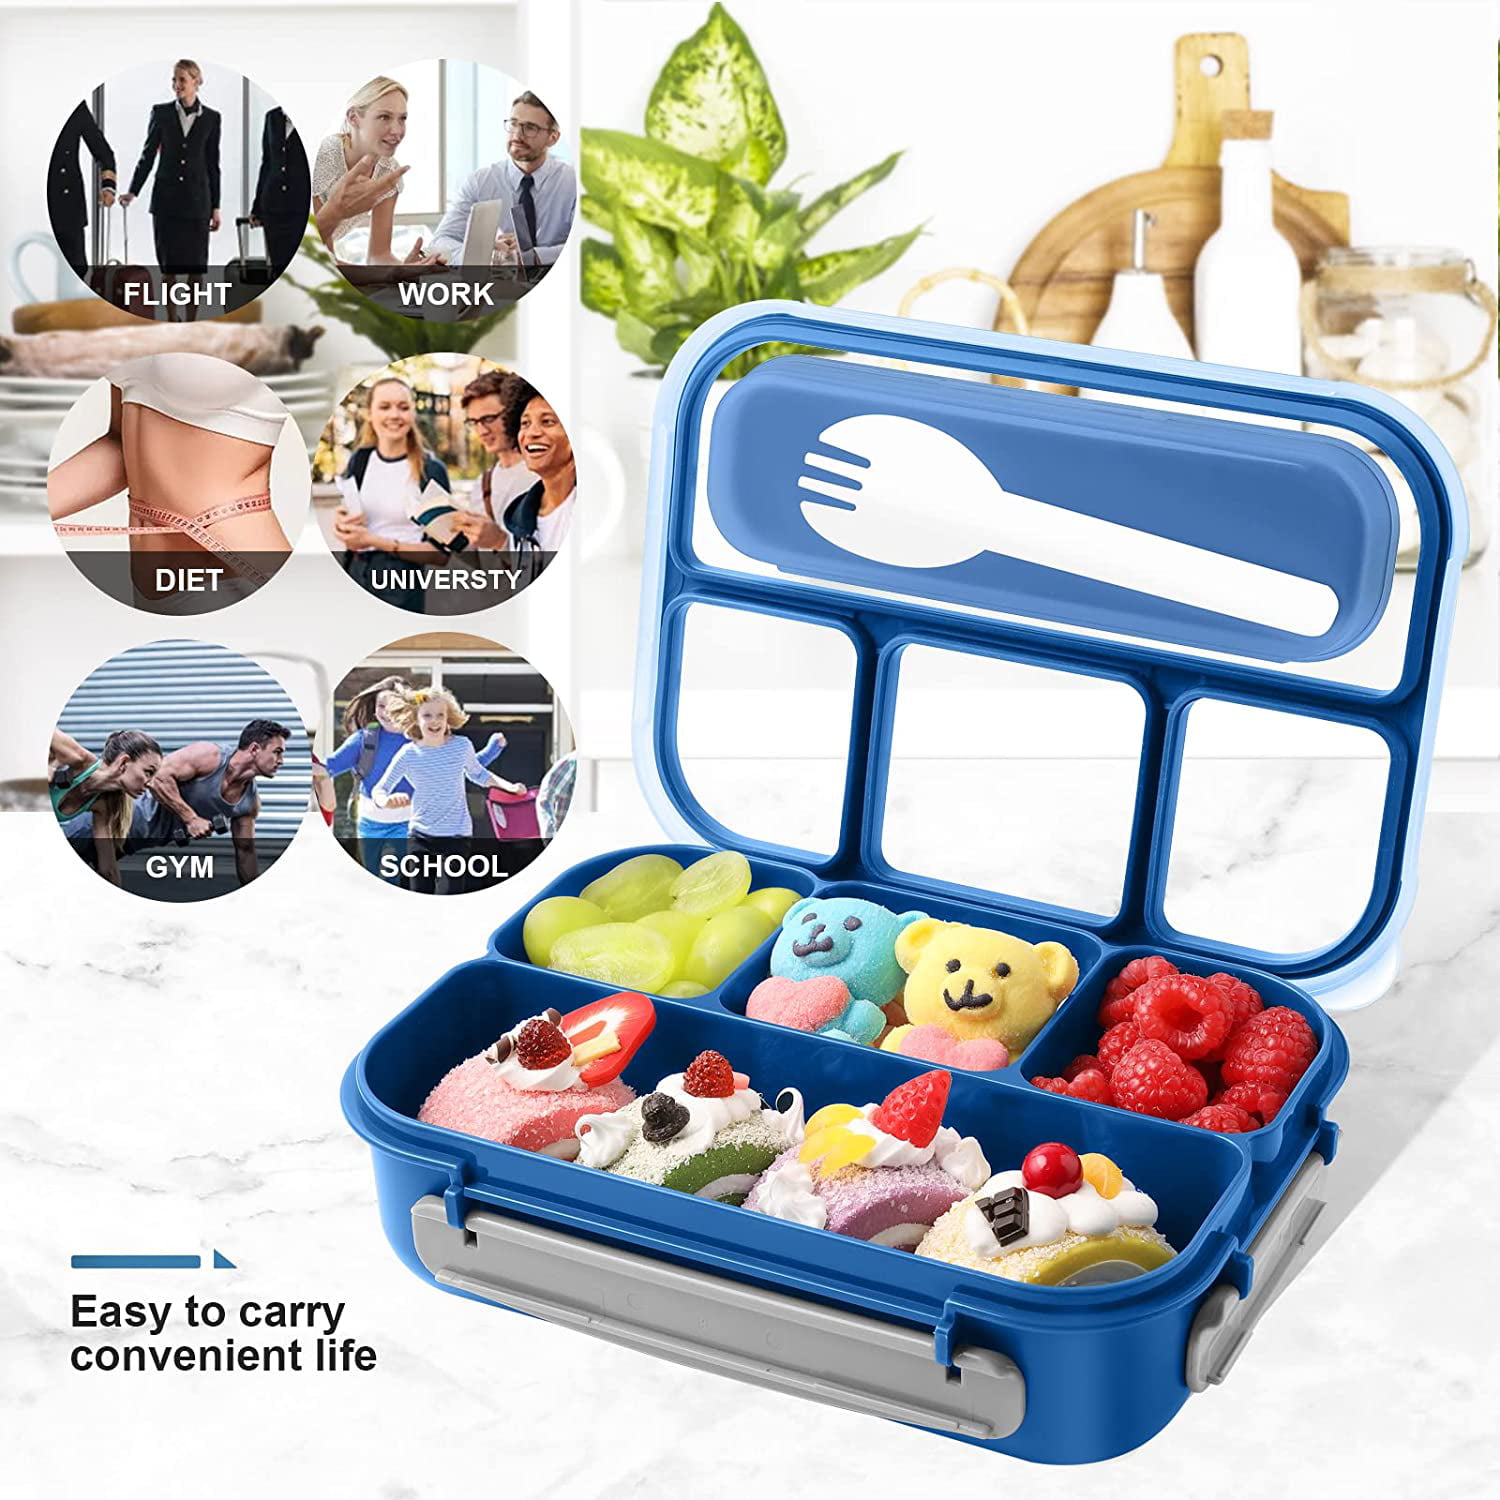 BUYDEEM Bento Lunch Box, 3.4 Cups Food Container for Kids and Adults